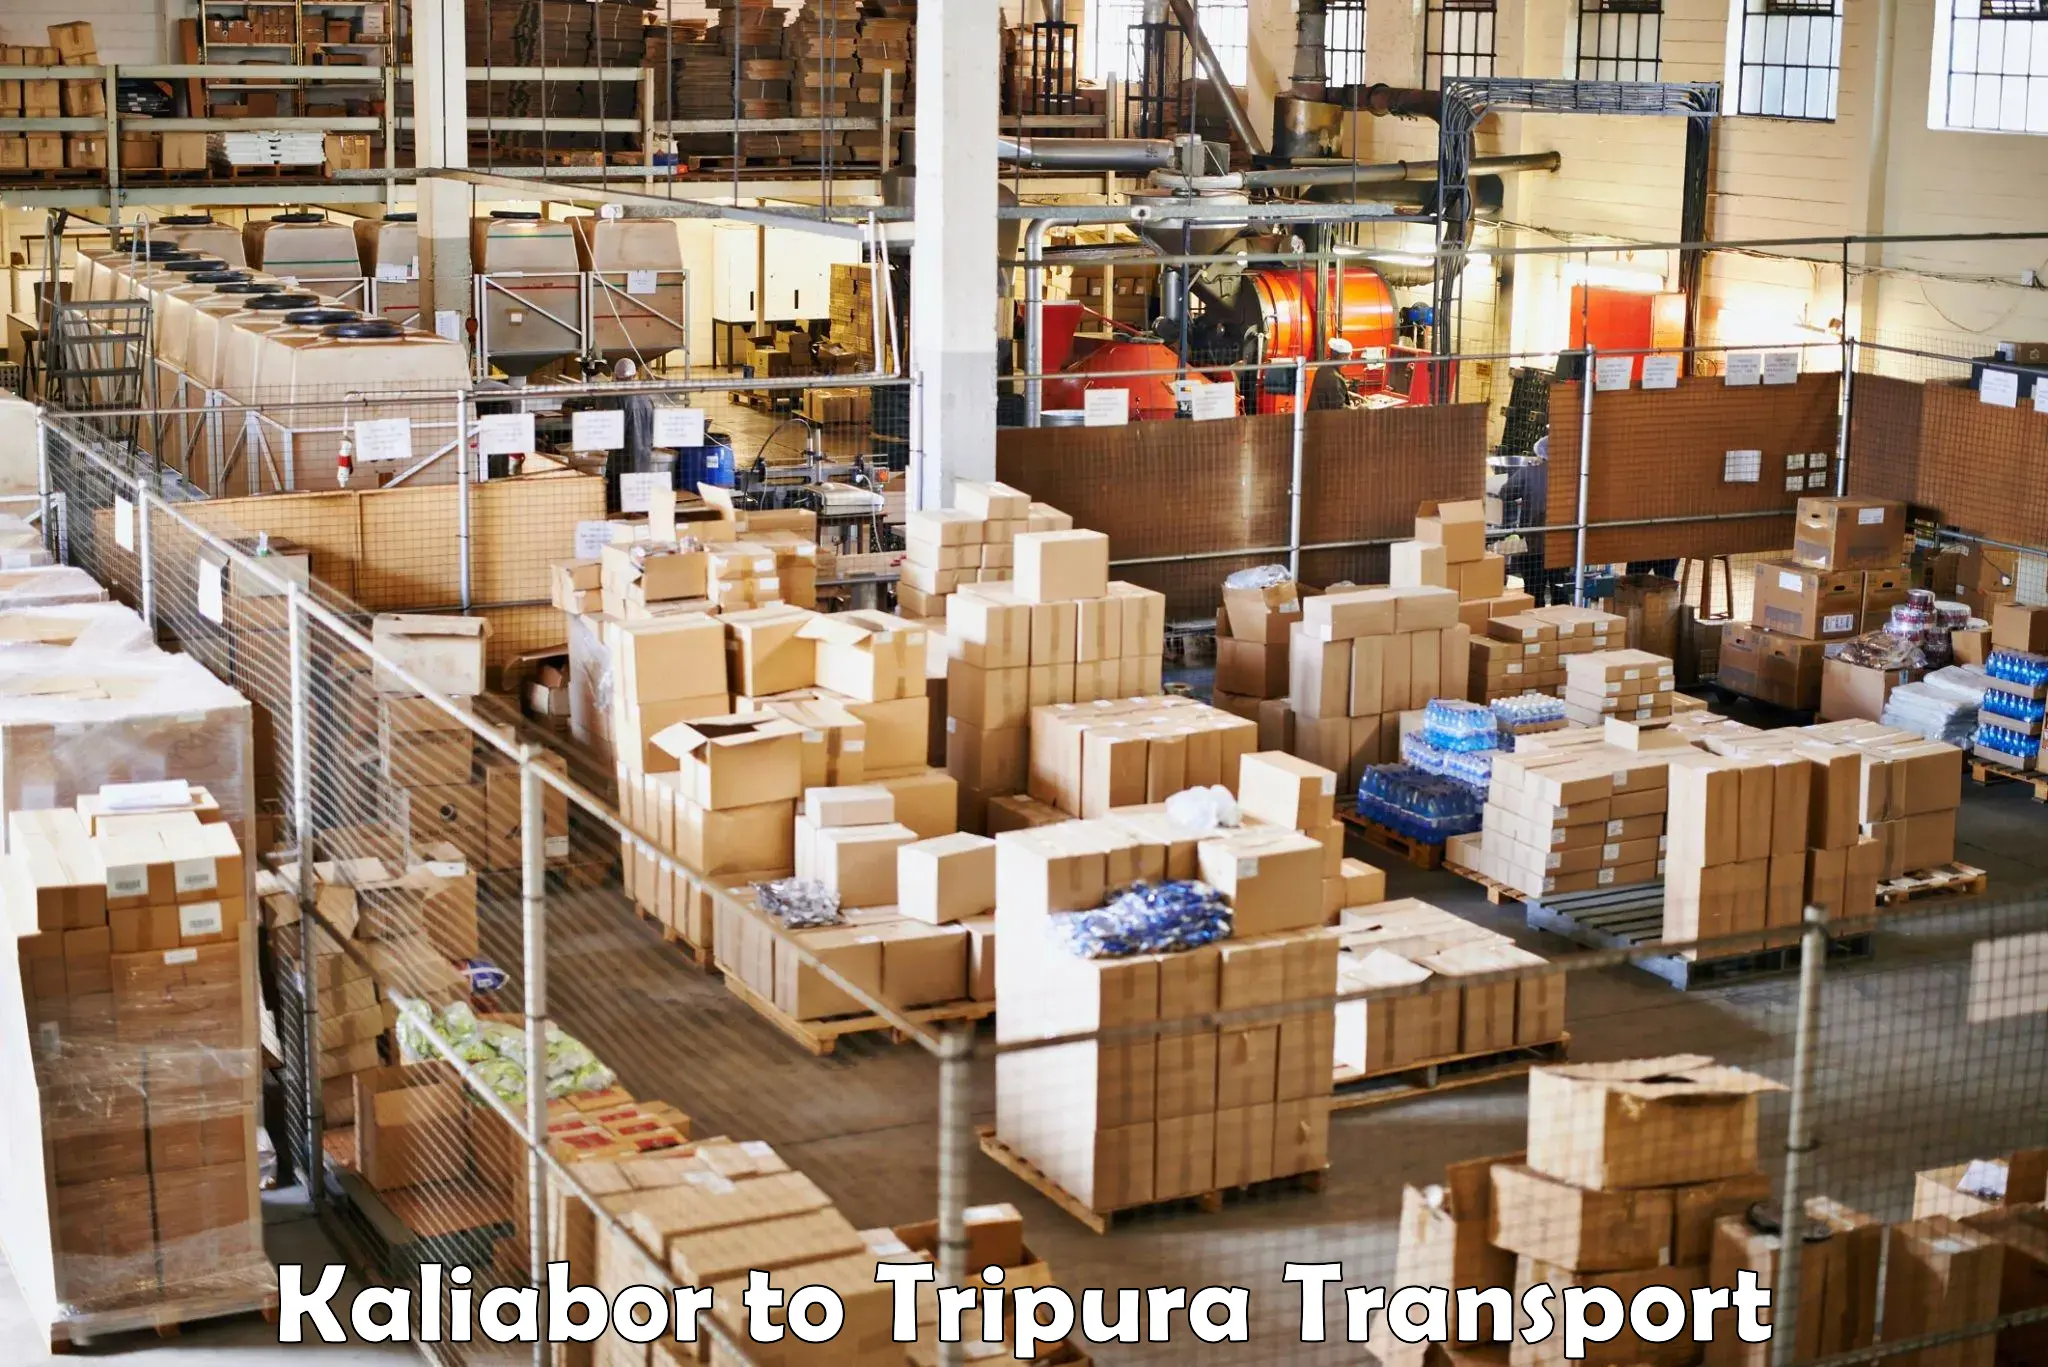 Part load transport service in India Kaliabor to Udaipur Tripura